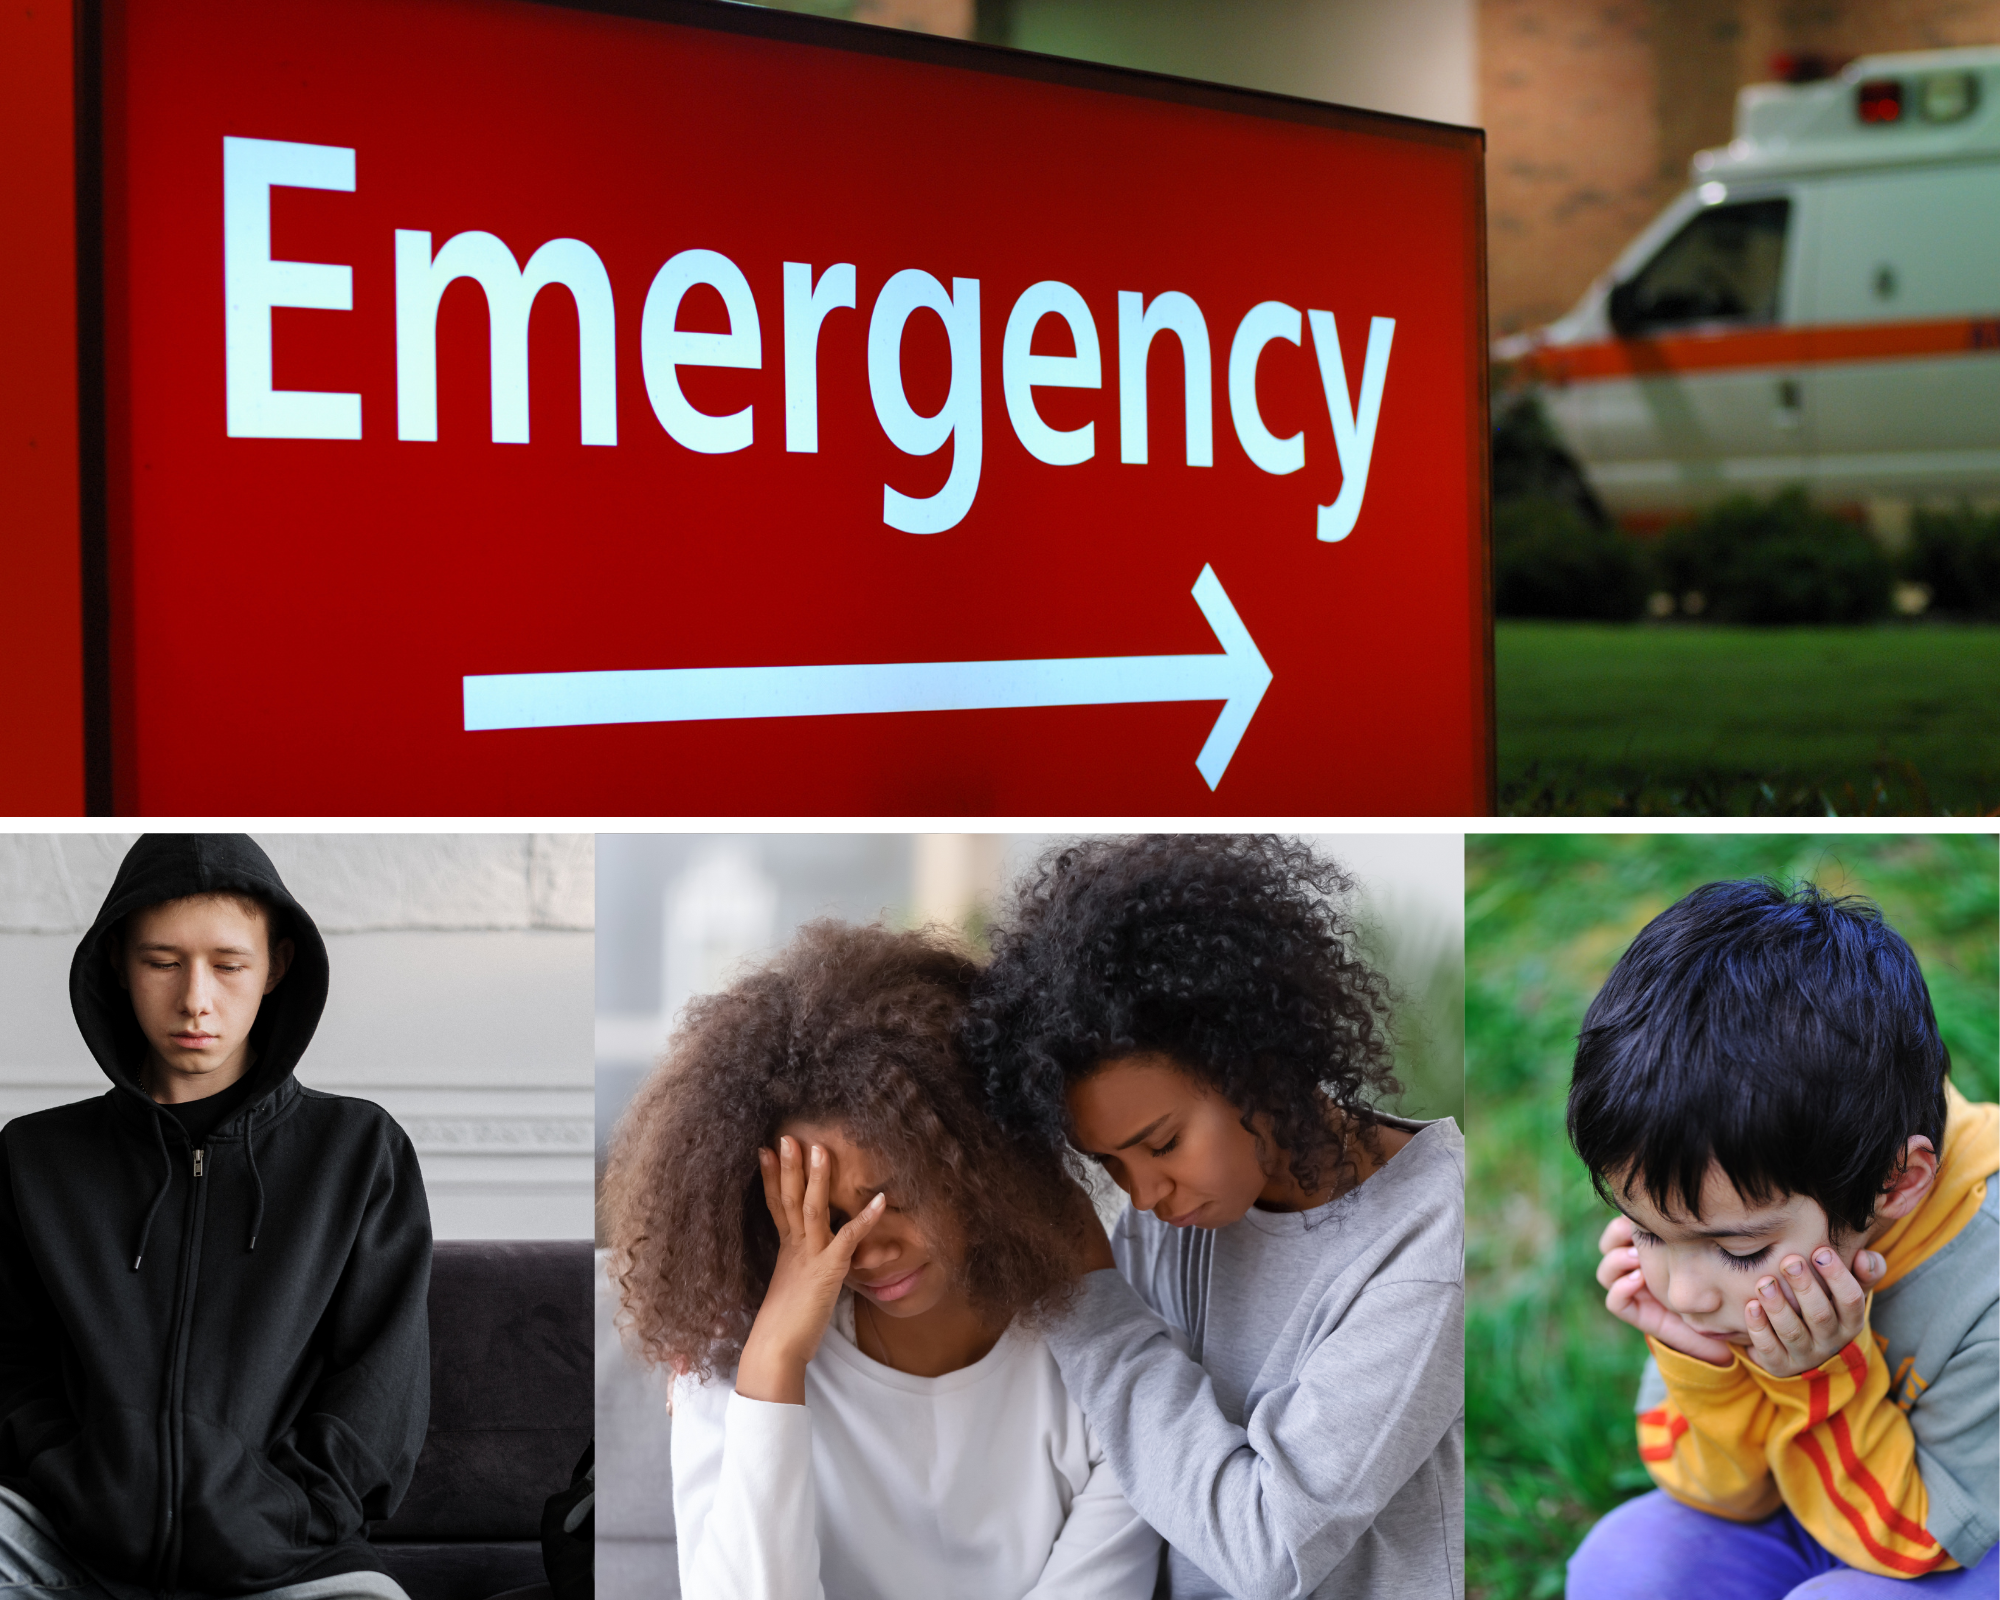 ER sign with ambulance in the background. Sad teen boy sitting on couch. Black mom and daughter sad and hugging. Young Asian boy sad